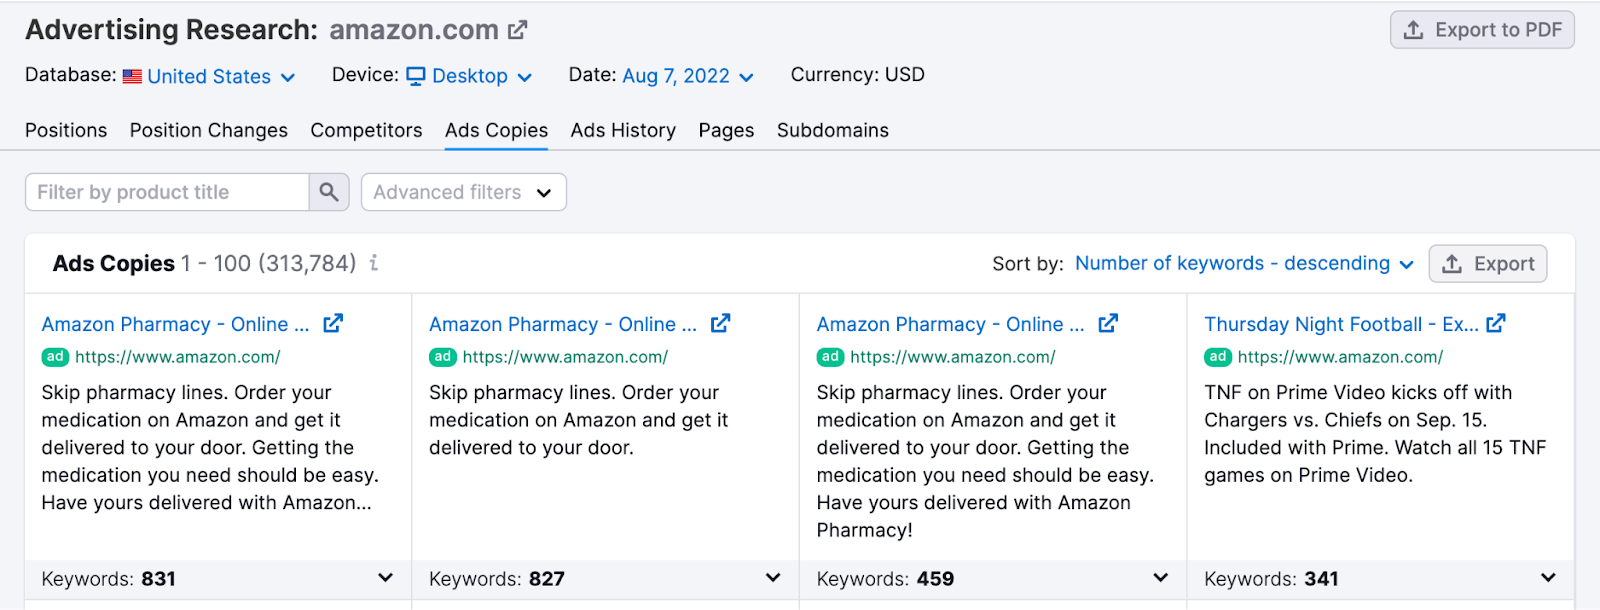 "Ads Copies" tab for amazon.com in Advertising Research tool